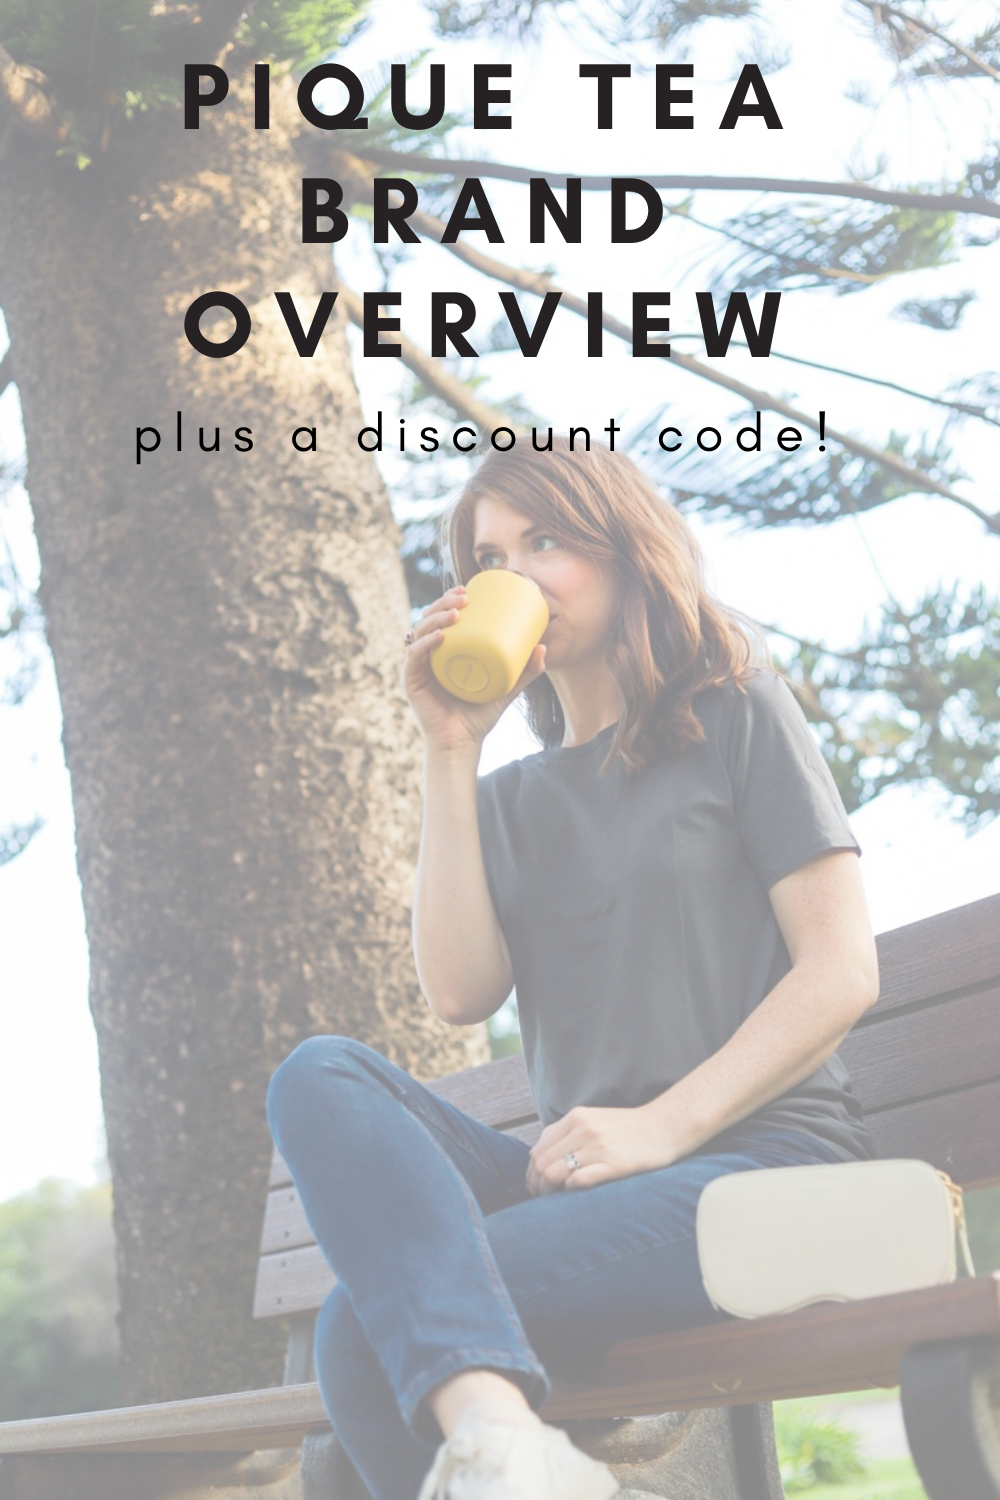 pique tea brand review, discount code, coupon, is pique worth the money, where to buy, fasting tea, ceremonial grade matcha, why pique is expensive, lments of style, la blogger, fellow carter mug